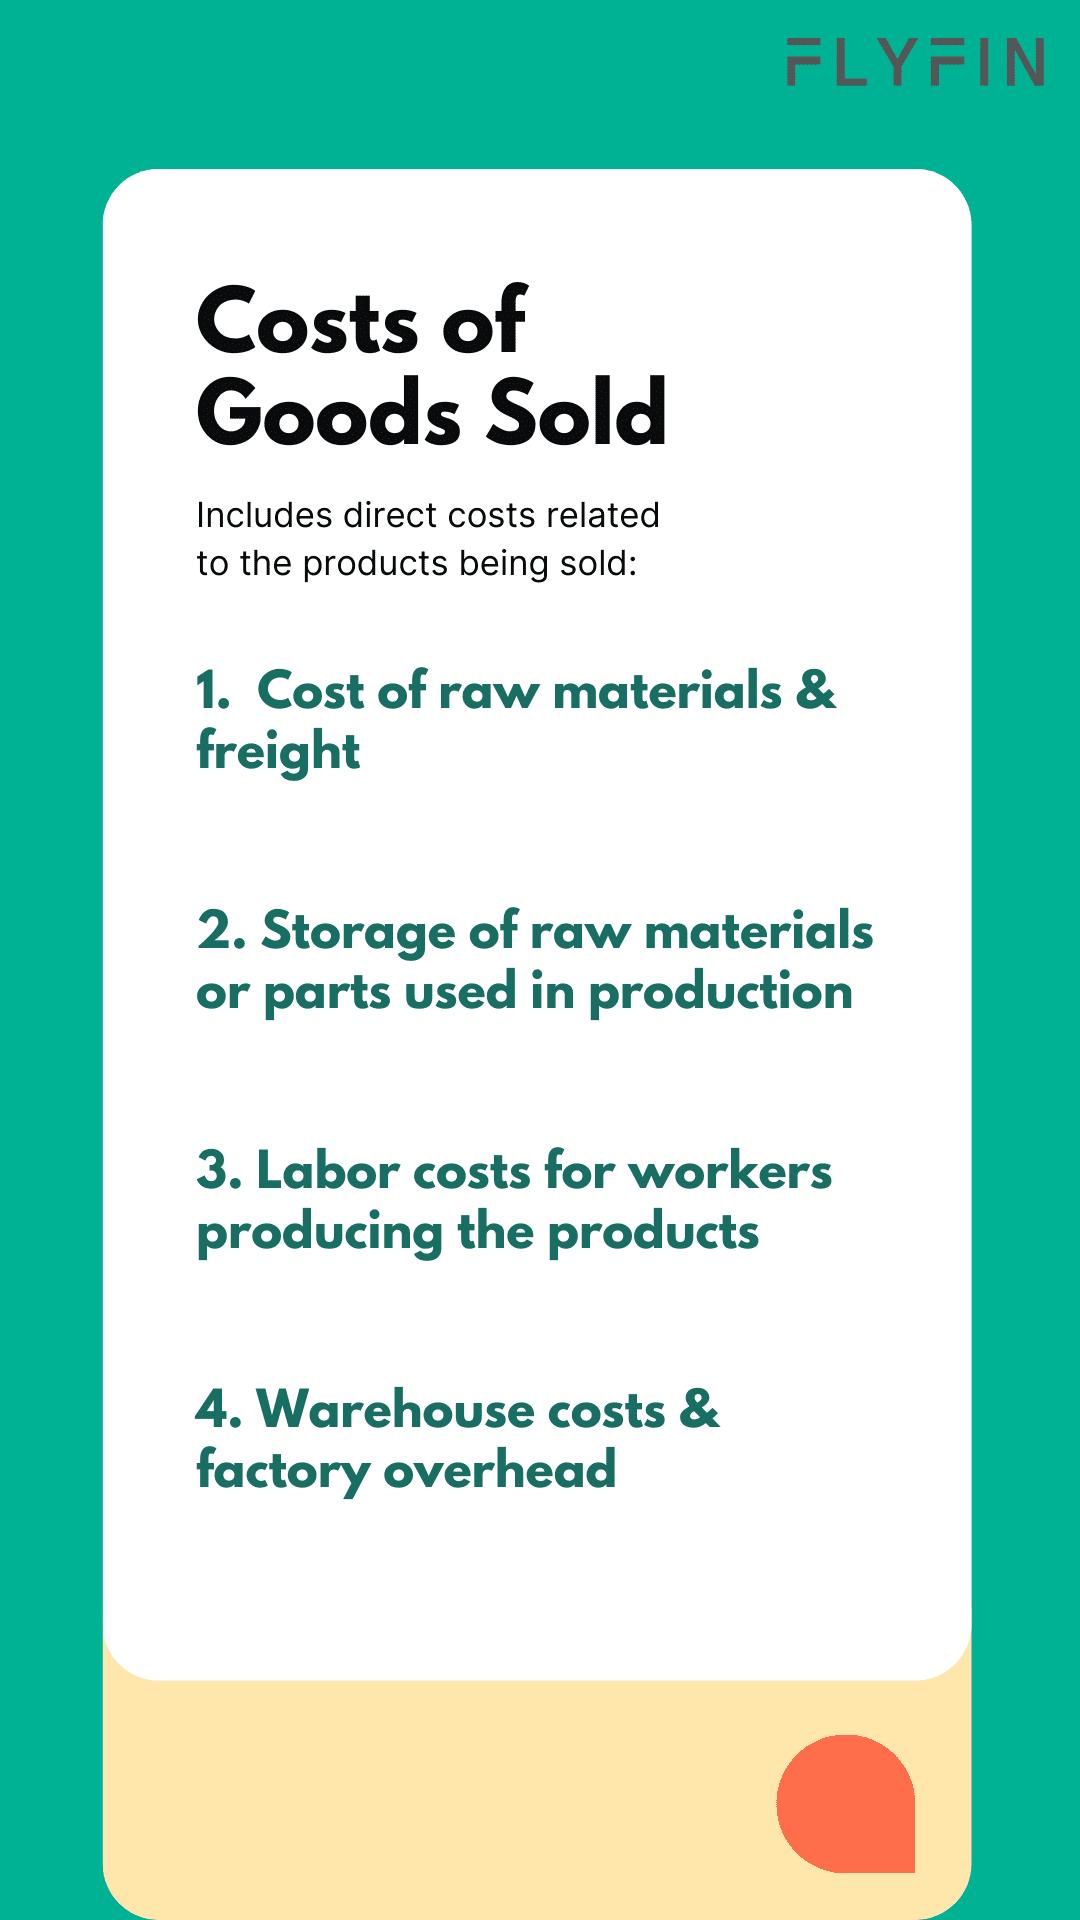 Image explaining costs of goods sold including direct costs related to products being sold such as raw materials, labor costs, warehouse and factory overhead. No mention of self employed, 1099, freelancer or taxes.